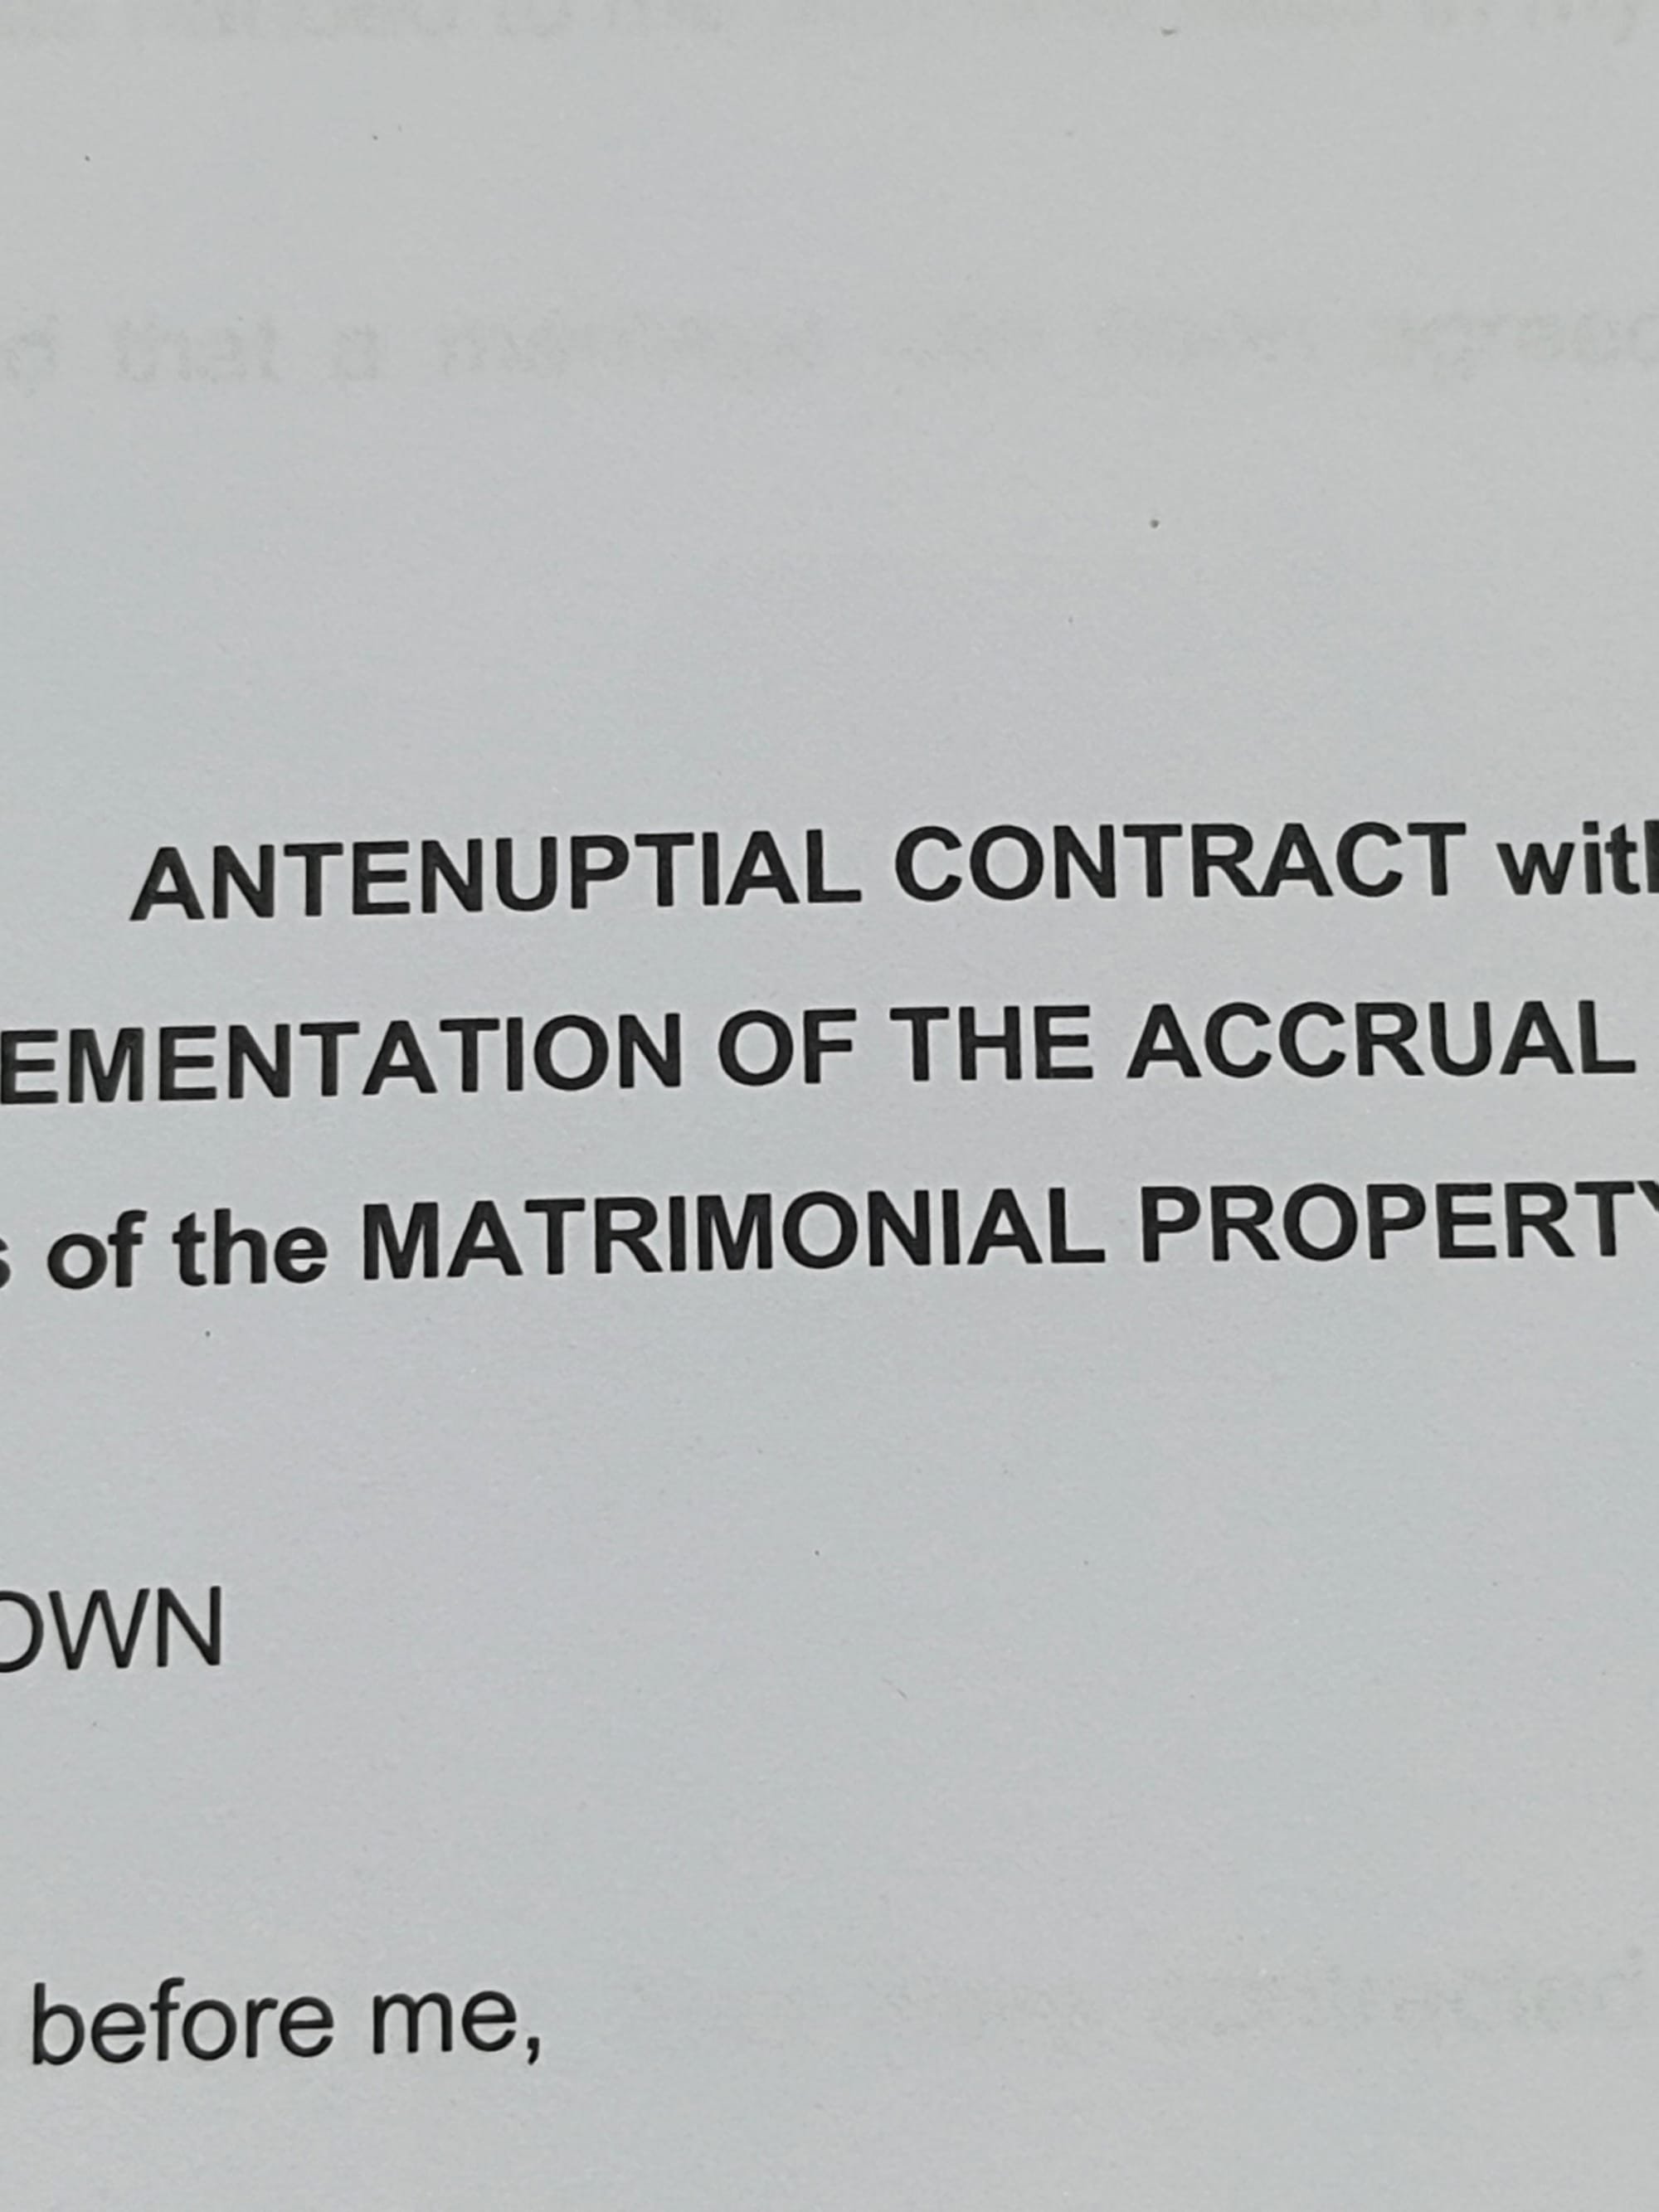 Antenuptial Contract with Accrual.